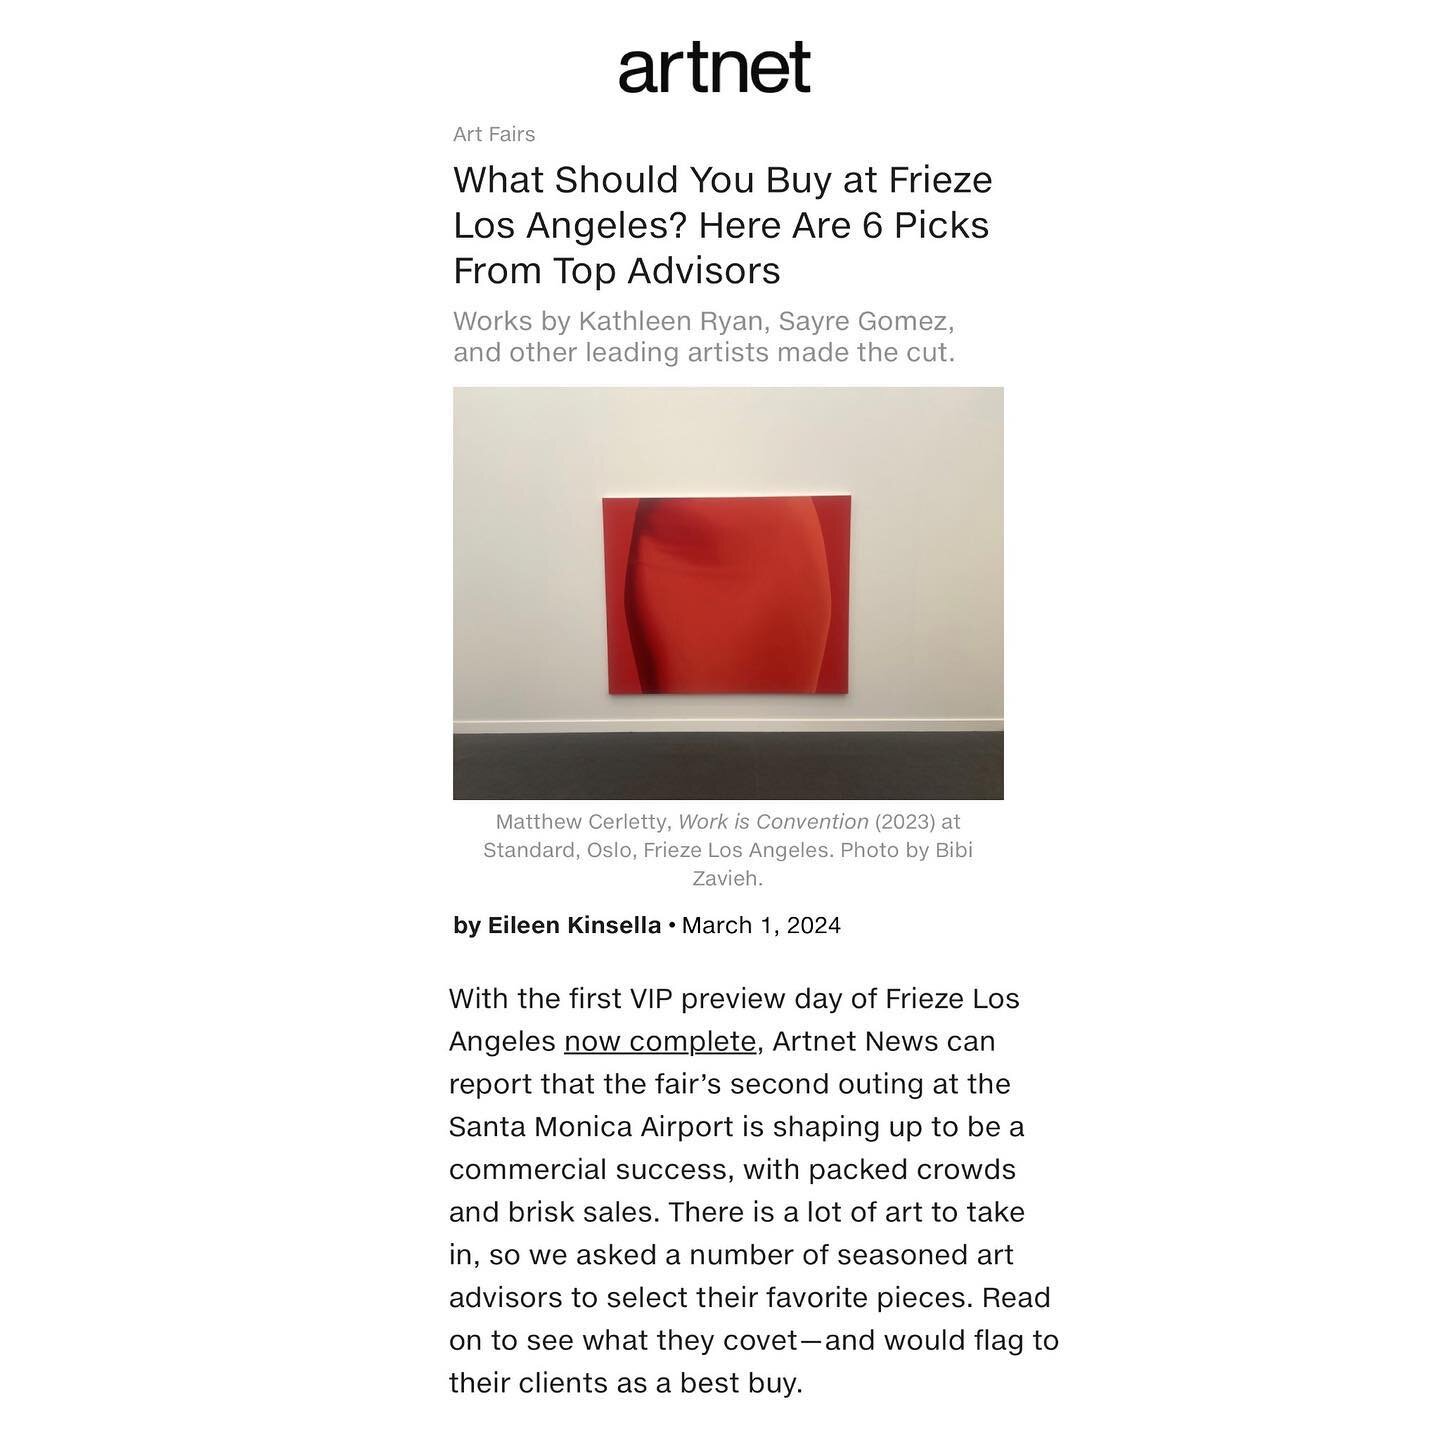 Last week I spoke with Artnet&rsquo;s @artnet Eileen Kinsella @ebkinsella about my top picks from Frieze LA @friezeofficial. The fair had so much artwork of high caliber but I narrowed my choices down to sculptures by two artists that I have been eye